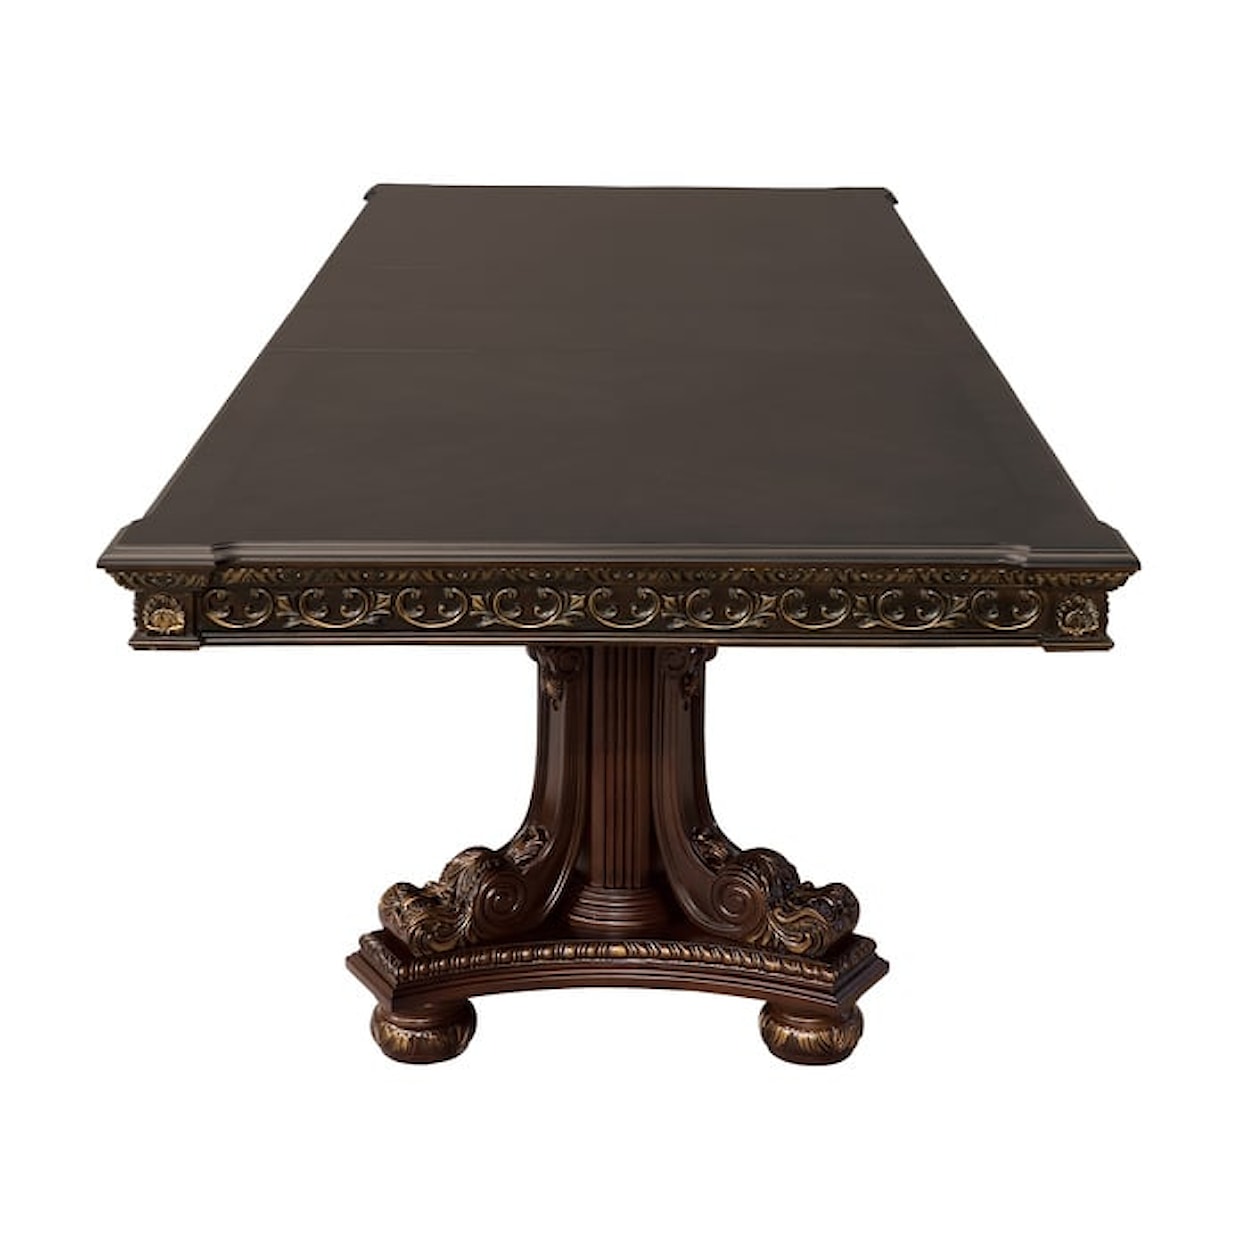 Homelegance Catalonia Dining Table